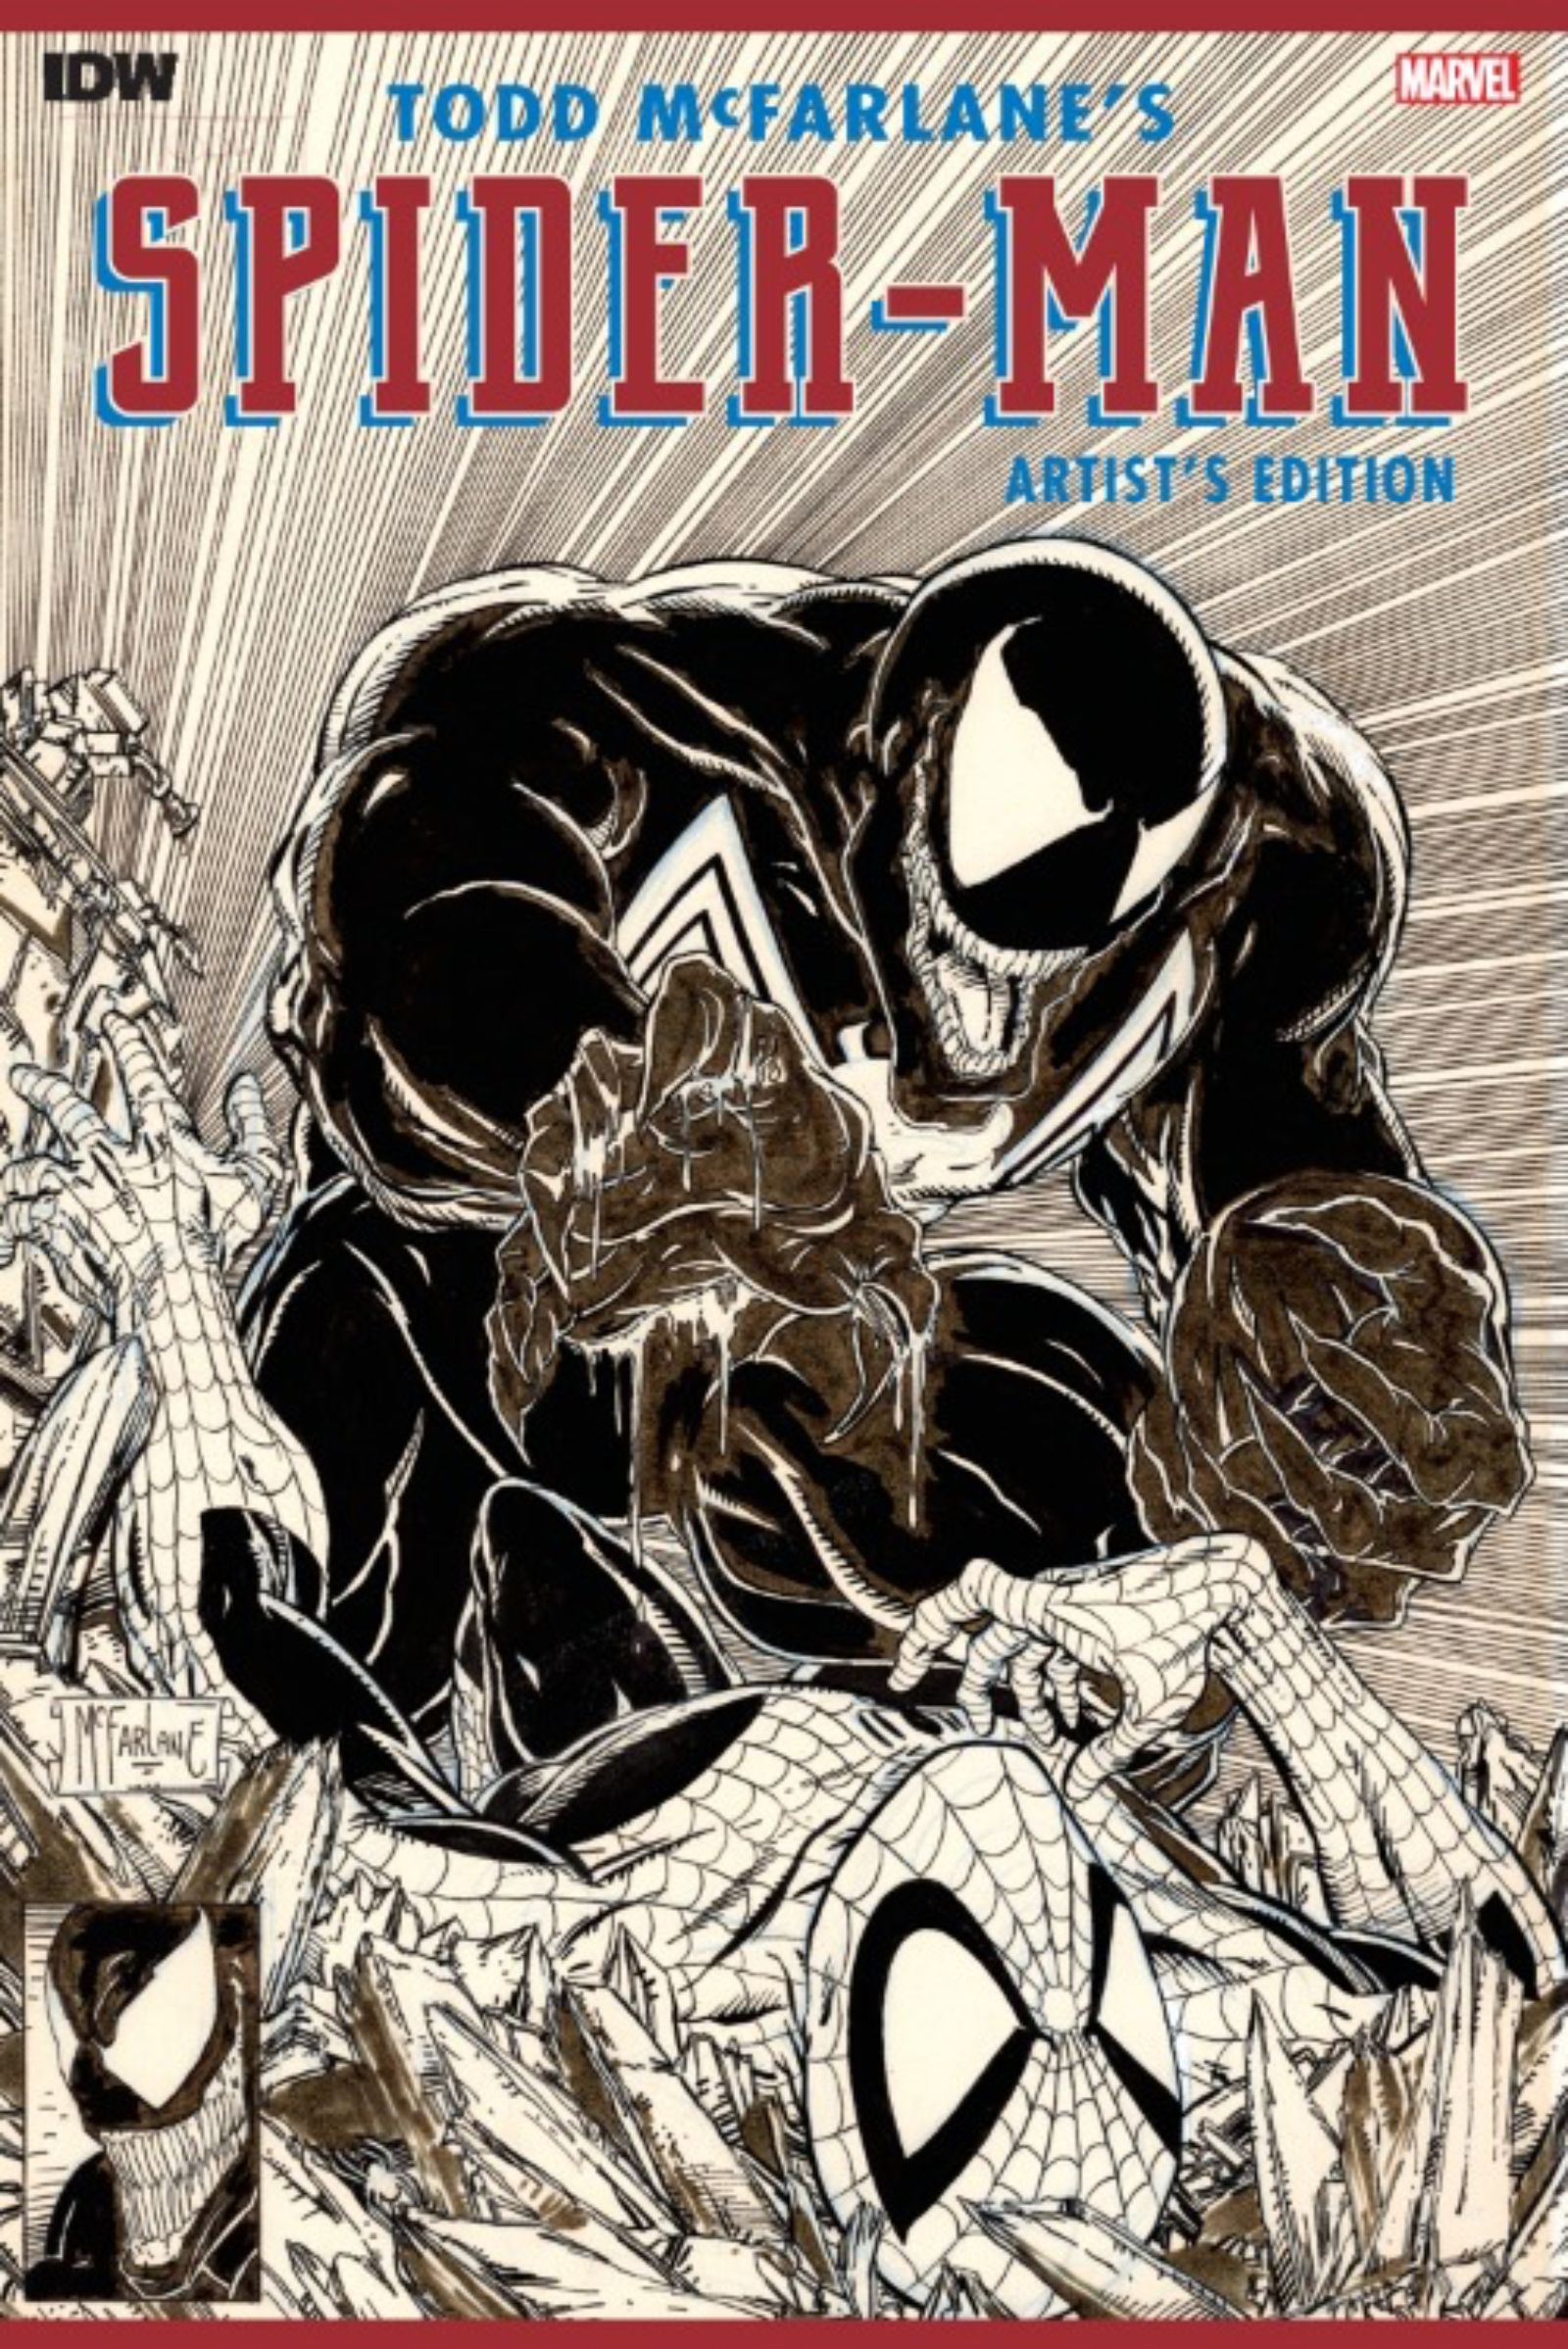 Todd McFarlane’s Gorgeous Spider-Man Art Gets New Collection